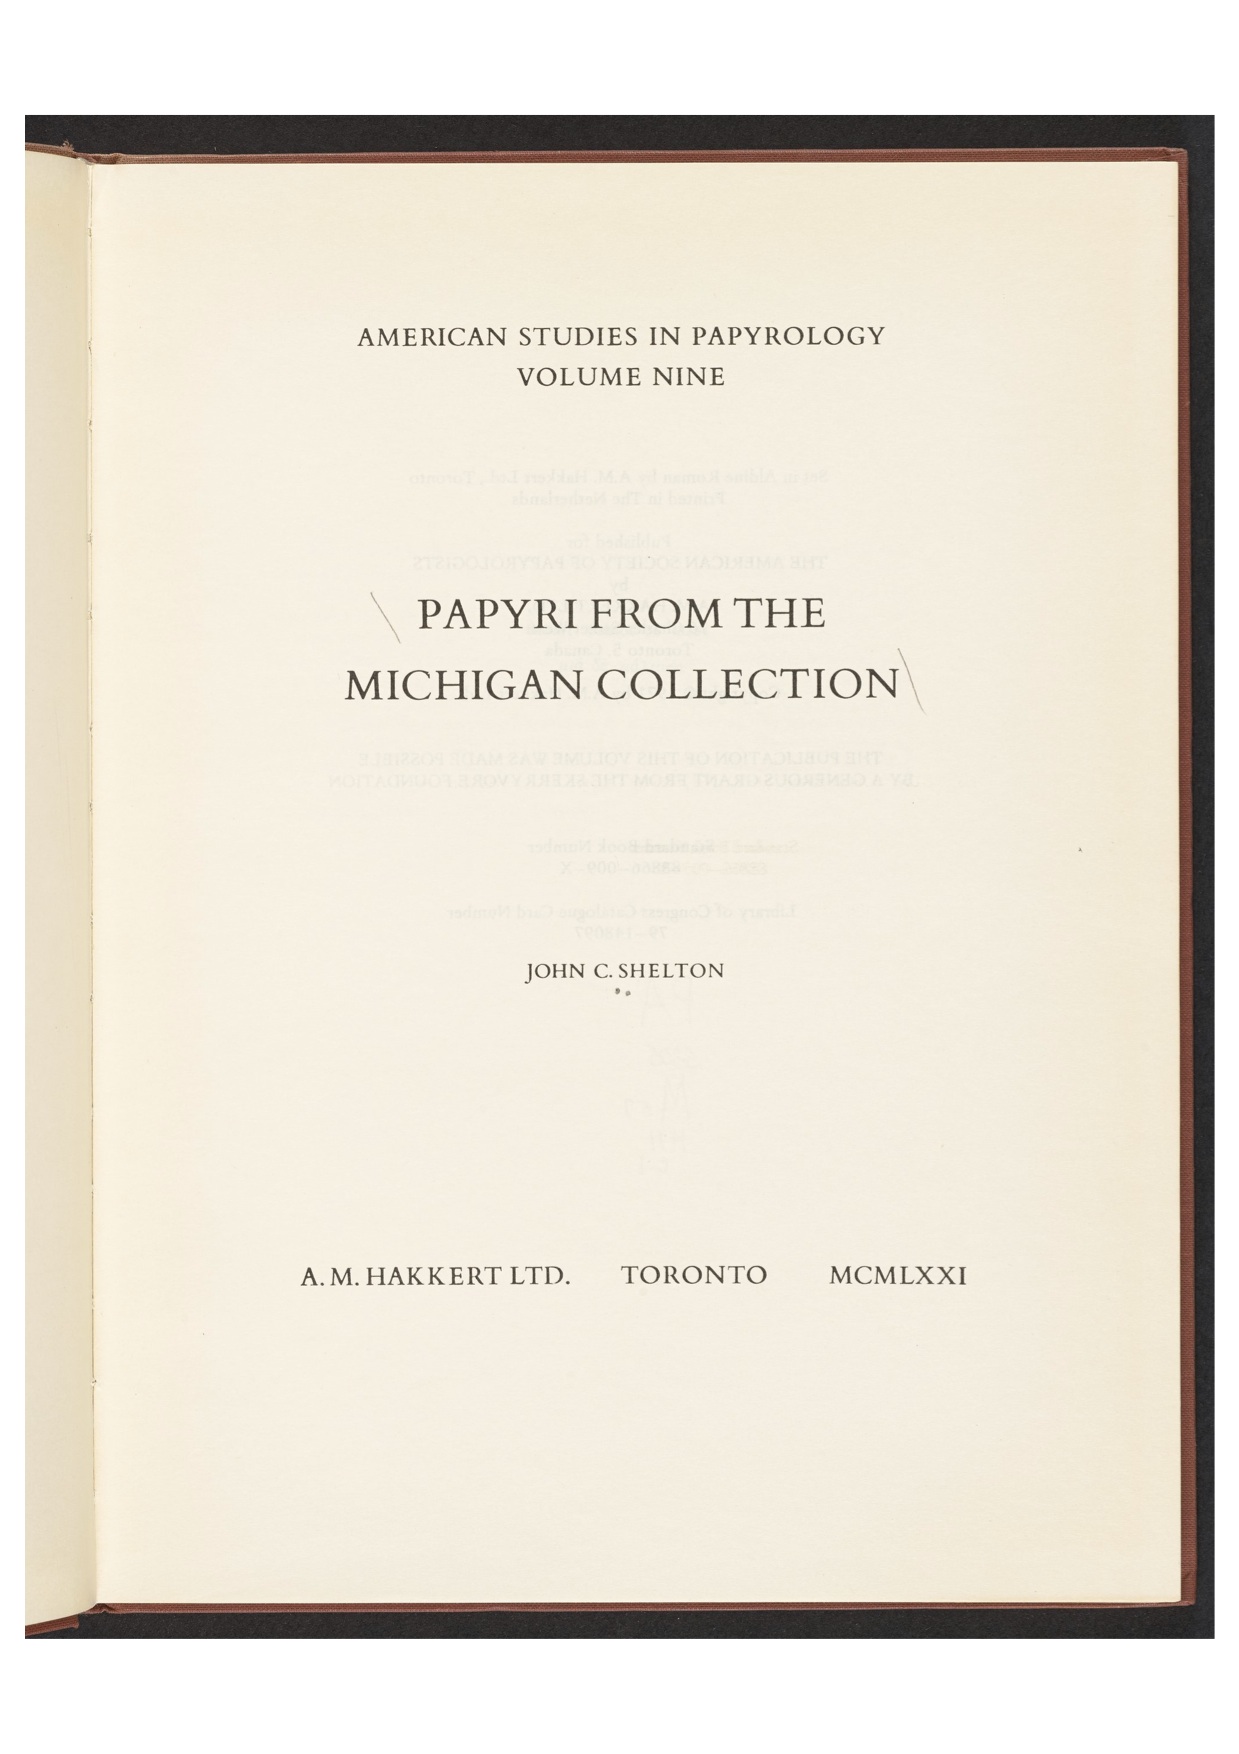 American Studies in Papyrology now available in the Ancient World Digital Library